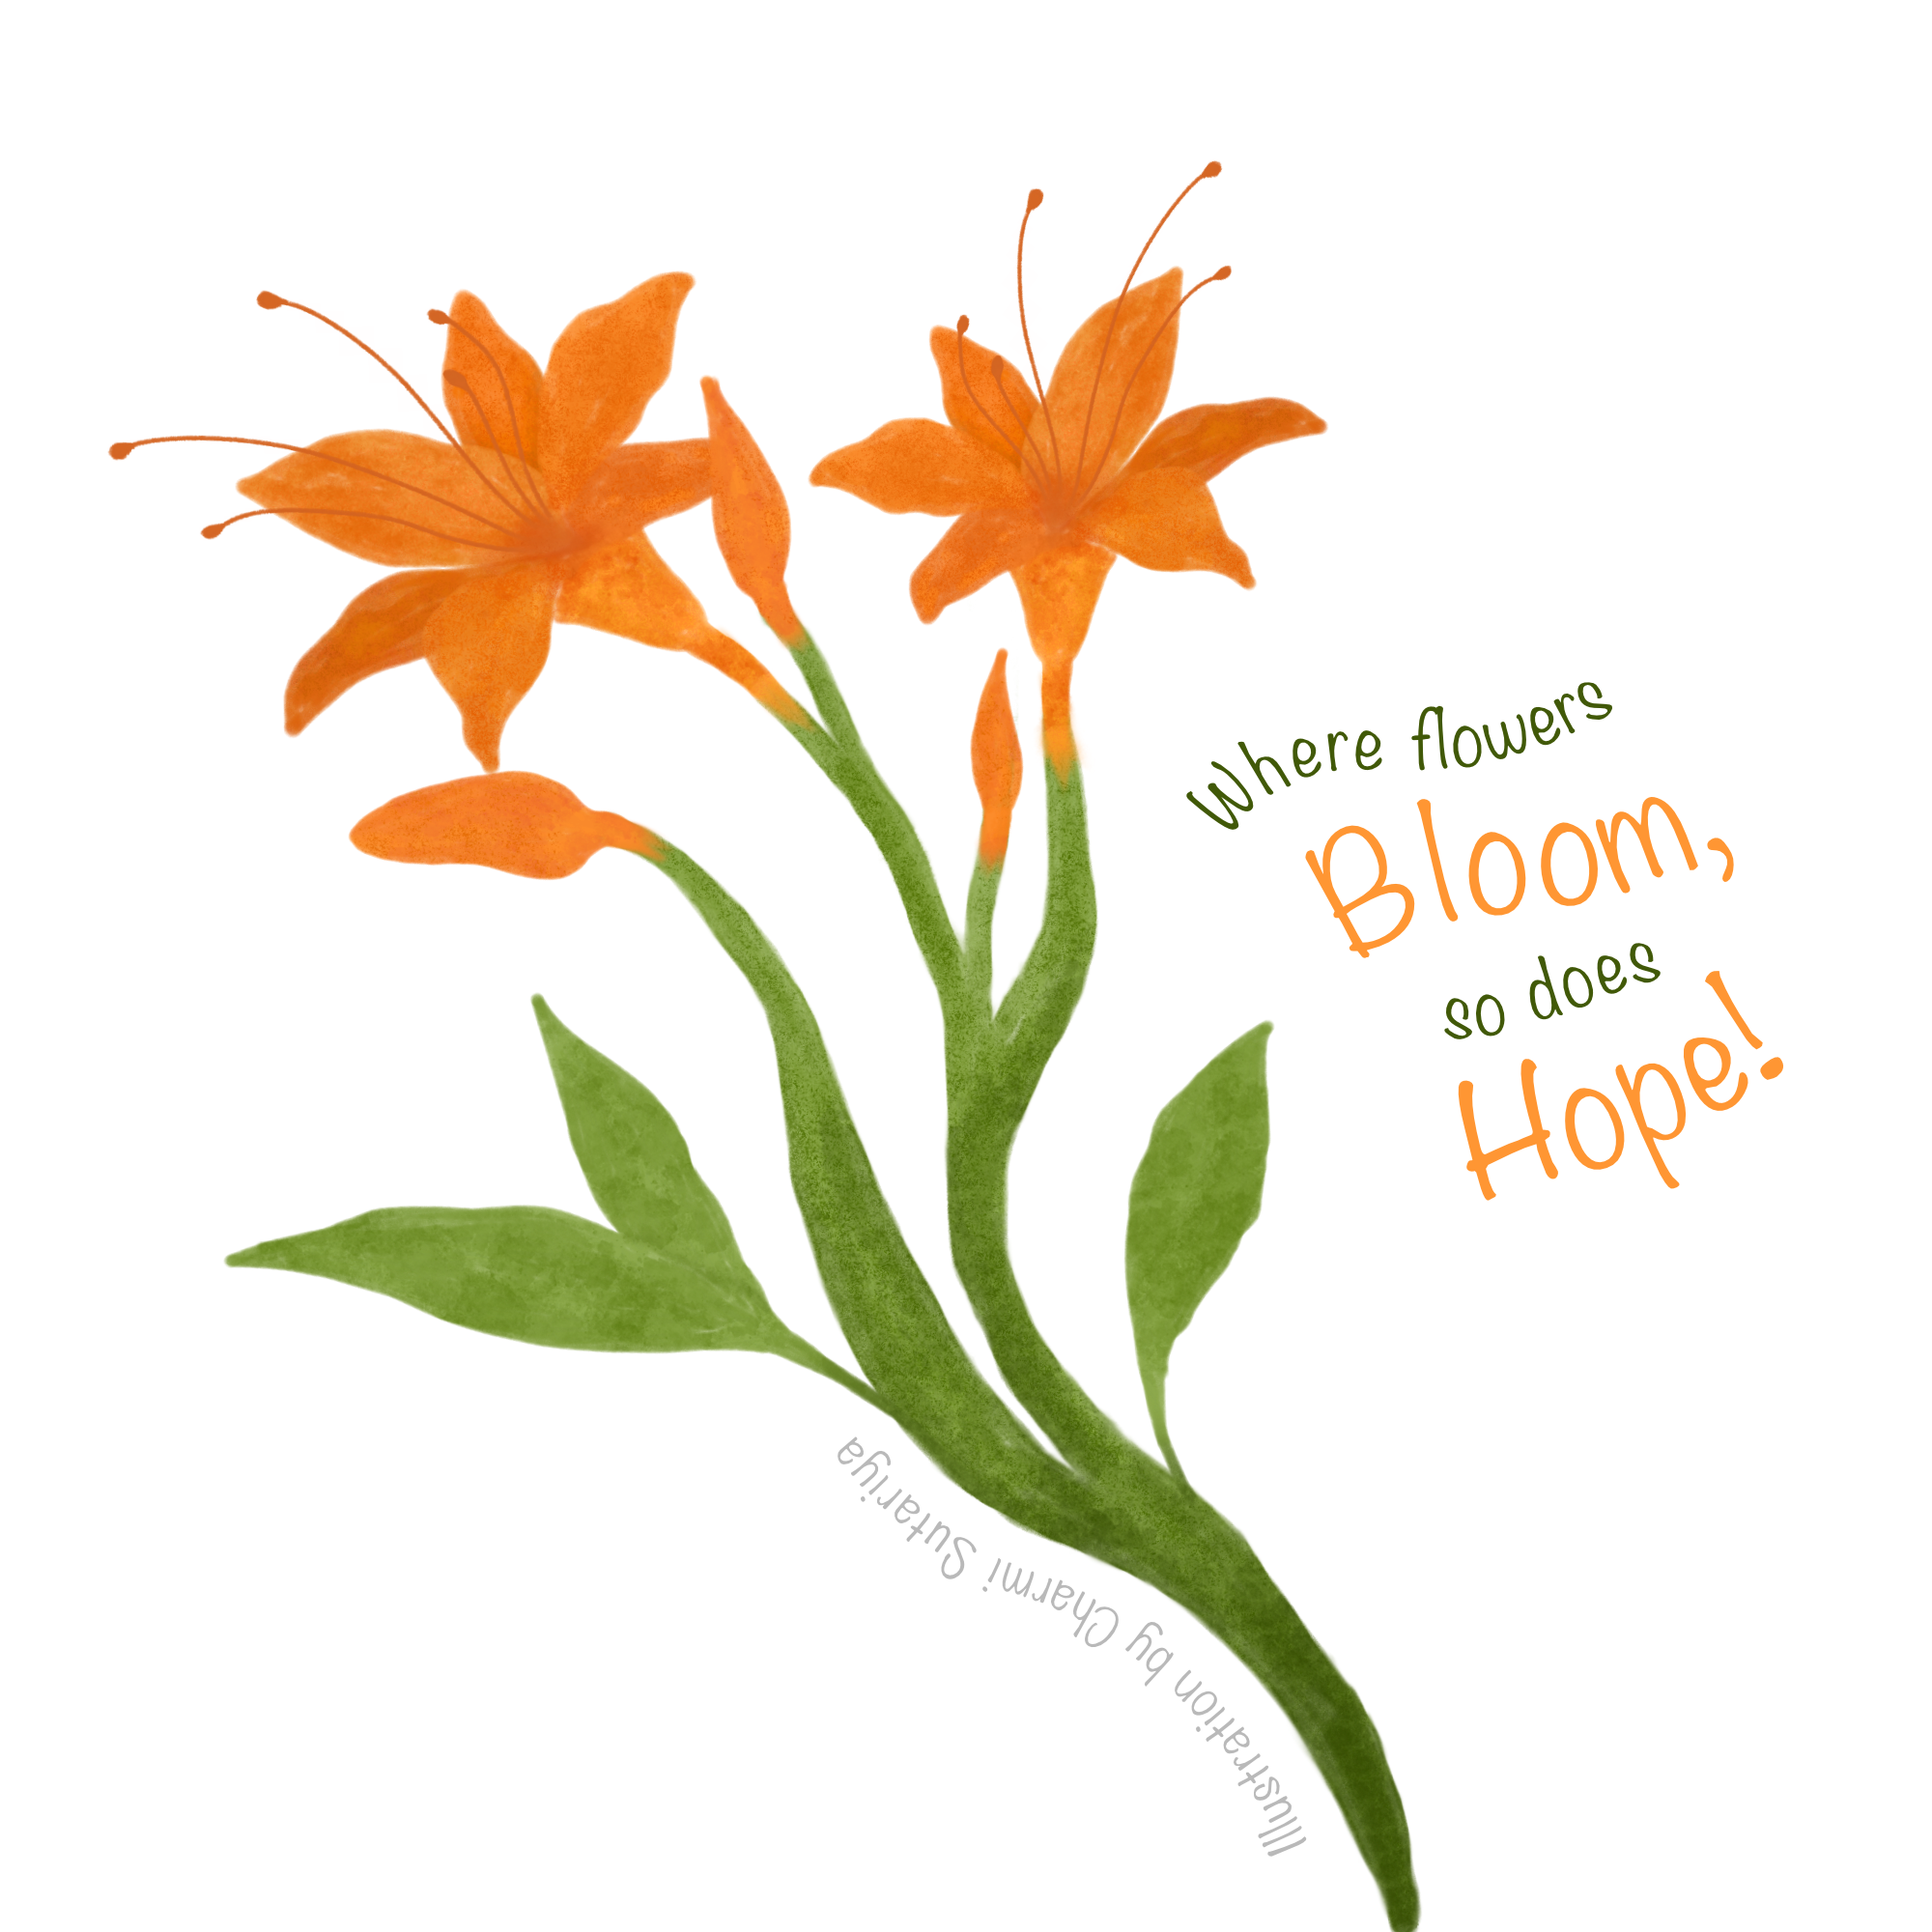 A quoted art print, watercolor illustration of orange flowers with the saying : Where flowers bloom, So does hope!